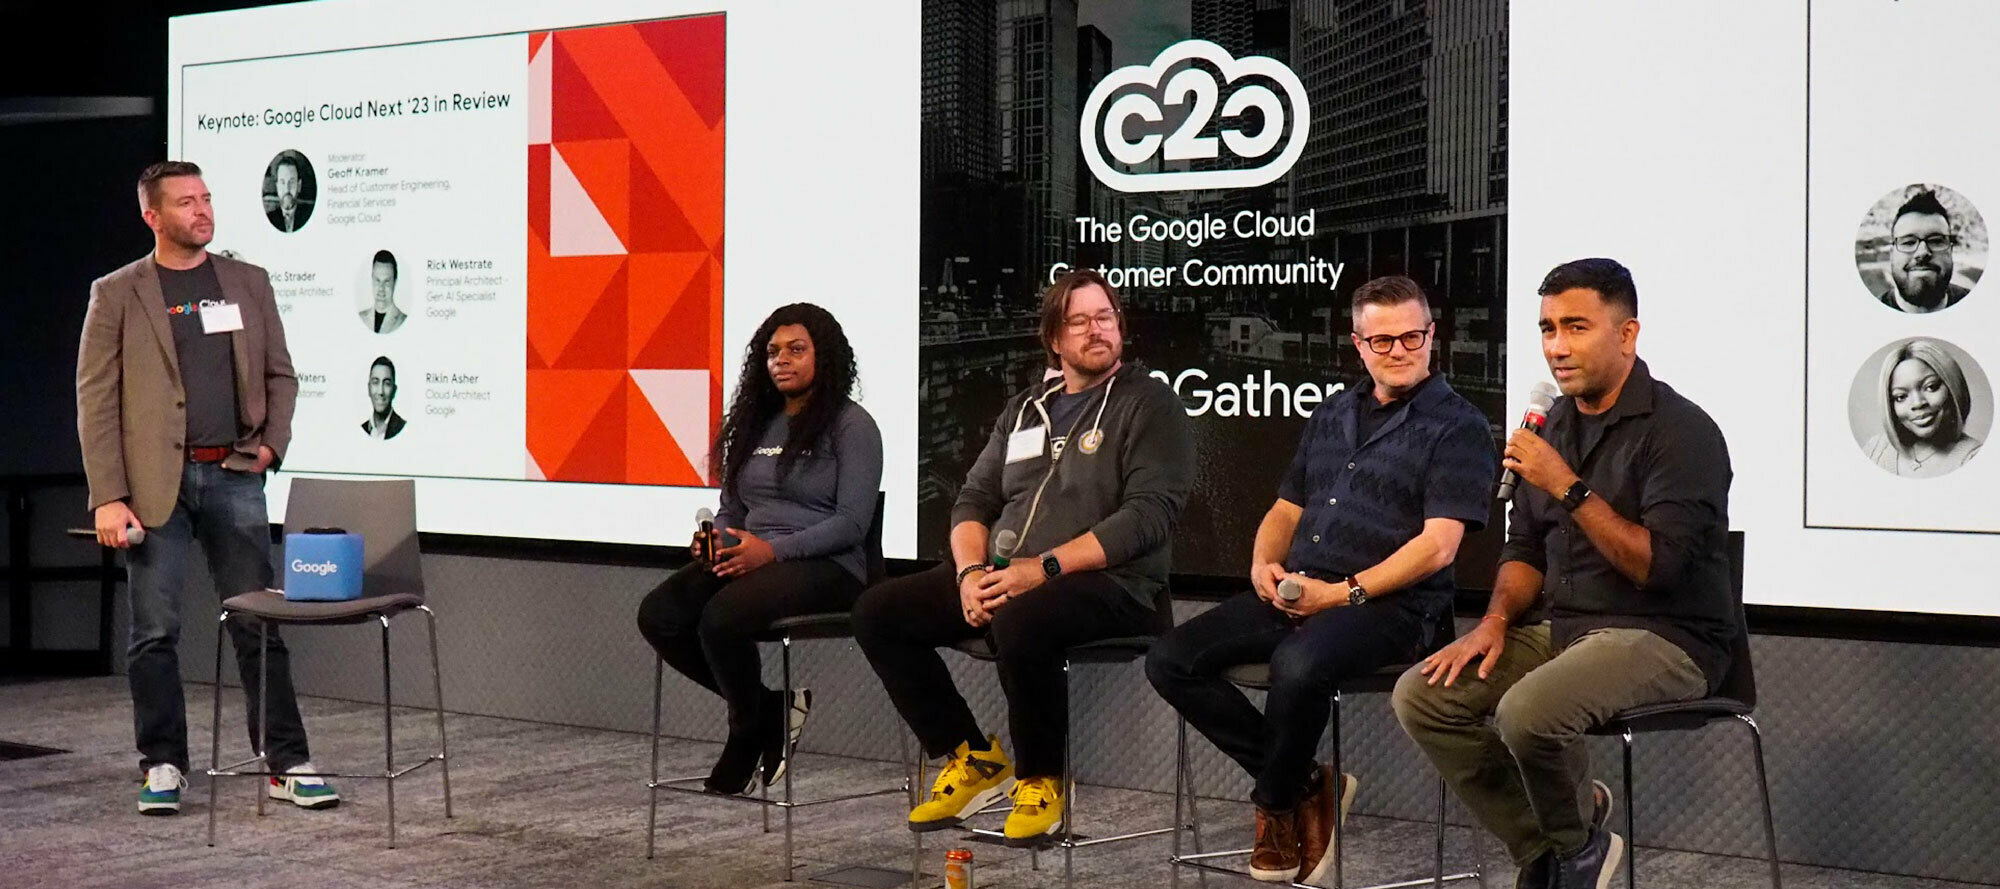 2Gather Chicago: Google Cloud Next ‘23 in Review